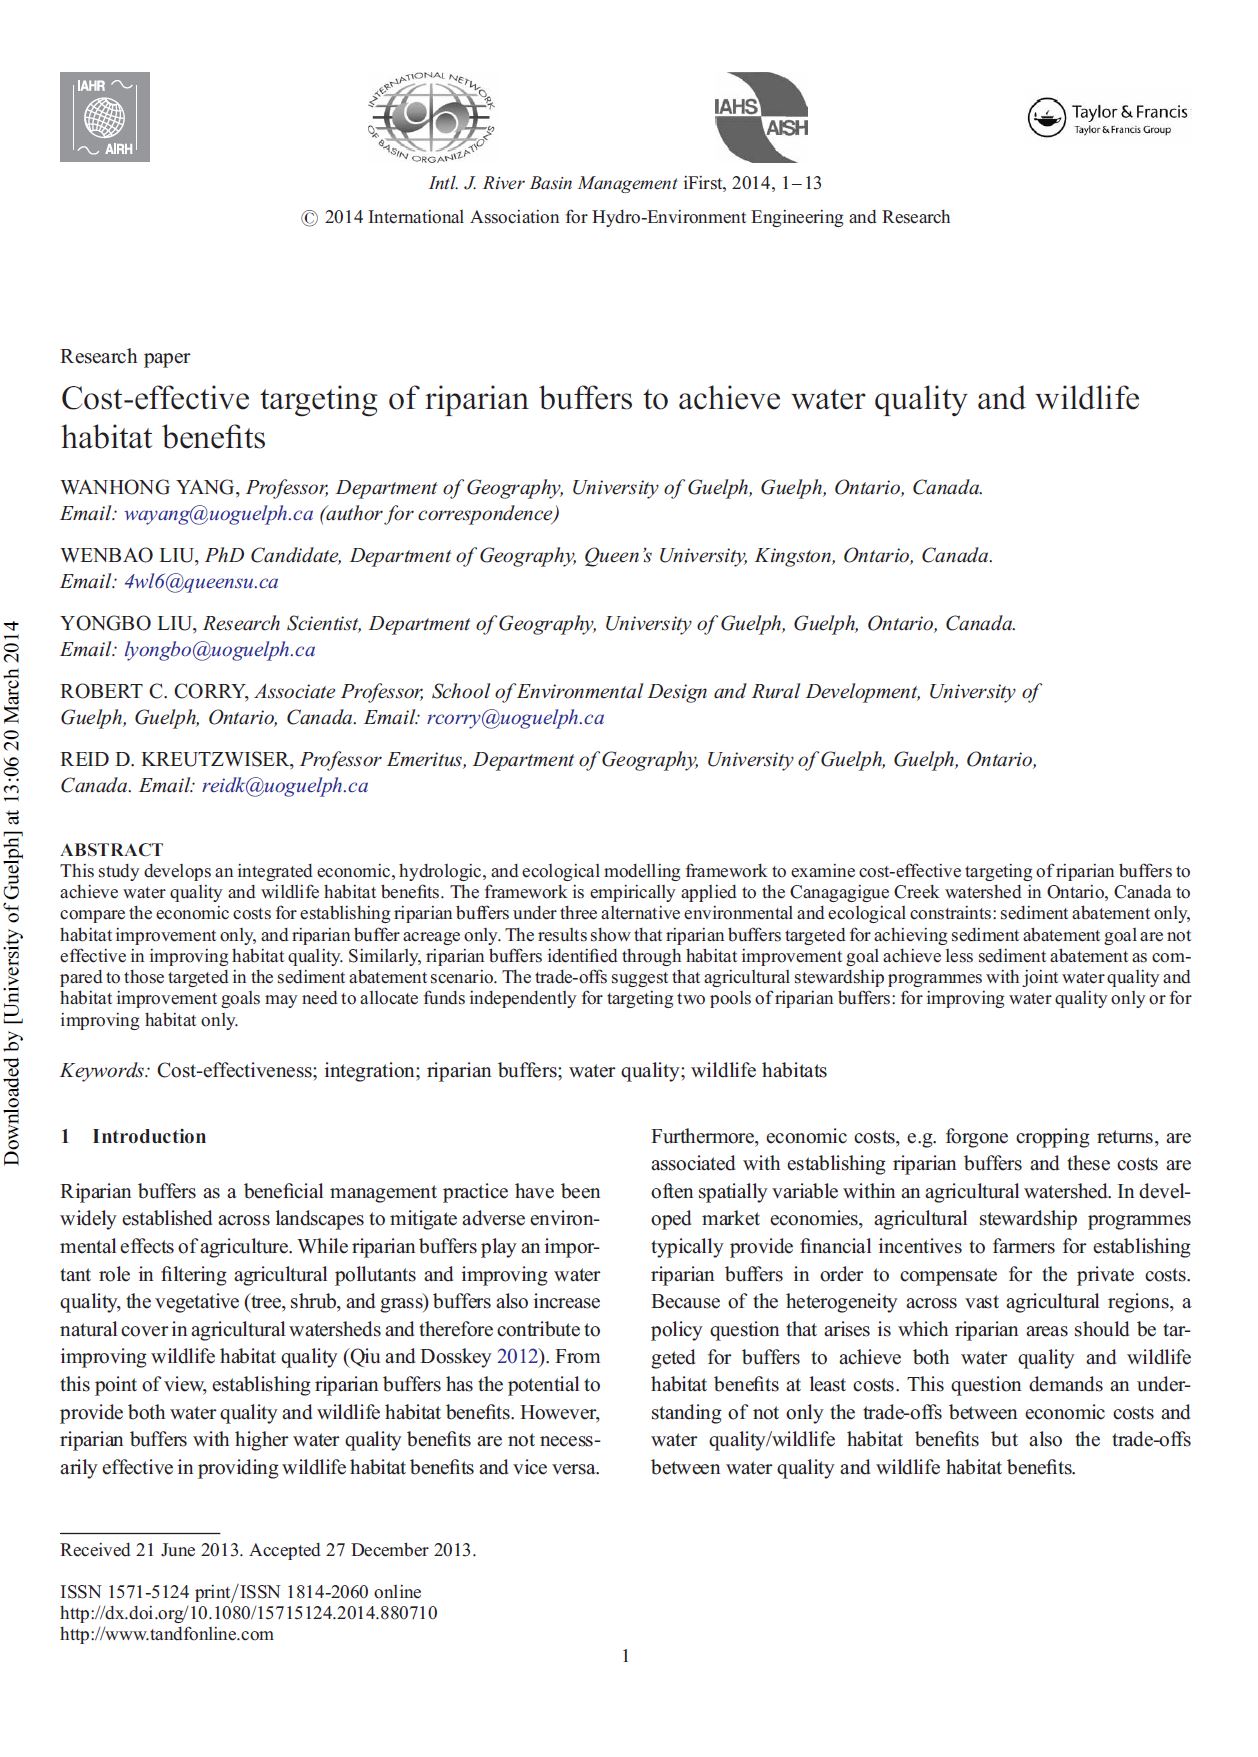 Cost-effective targeting of riparian buffers to achieve water quality and wildlife habitat benefits.